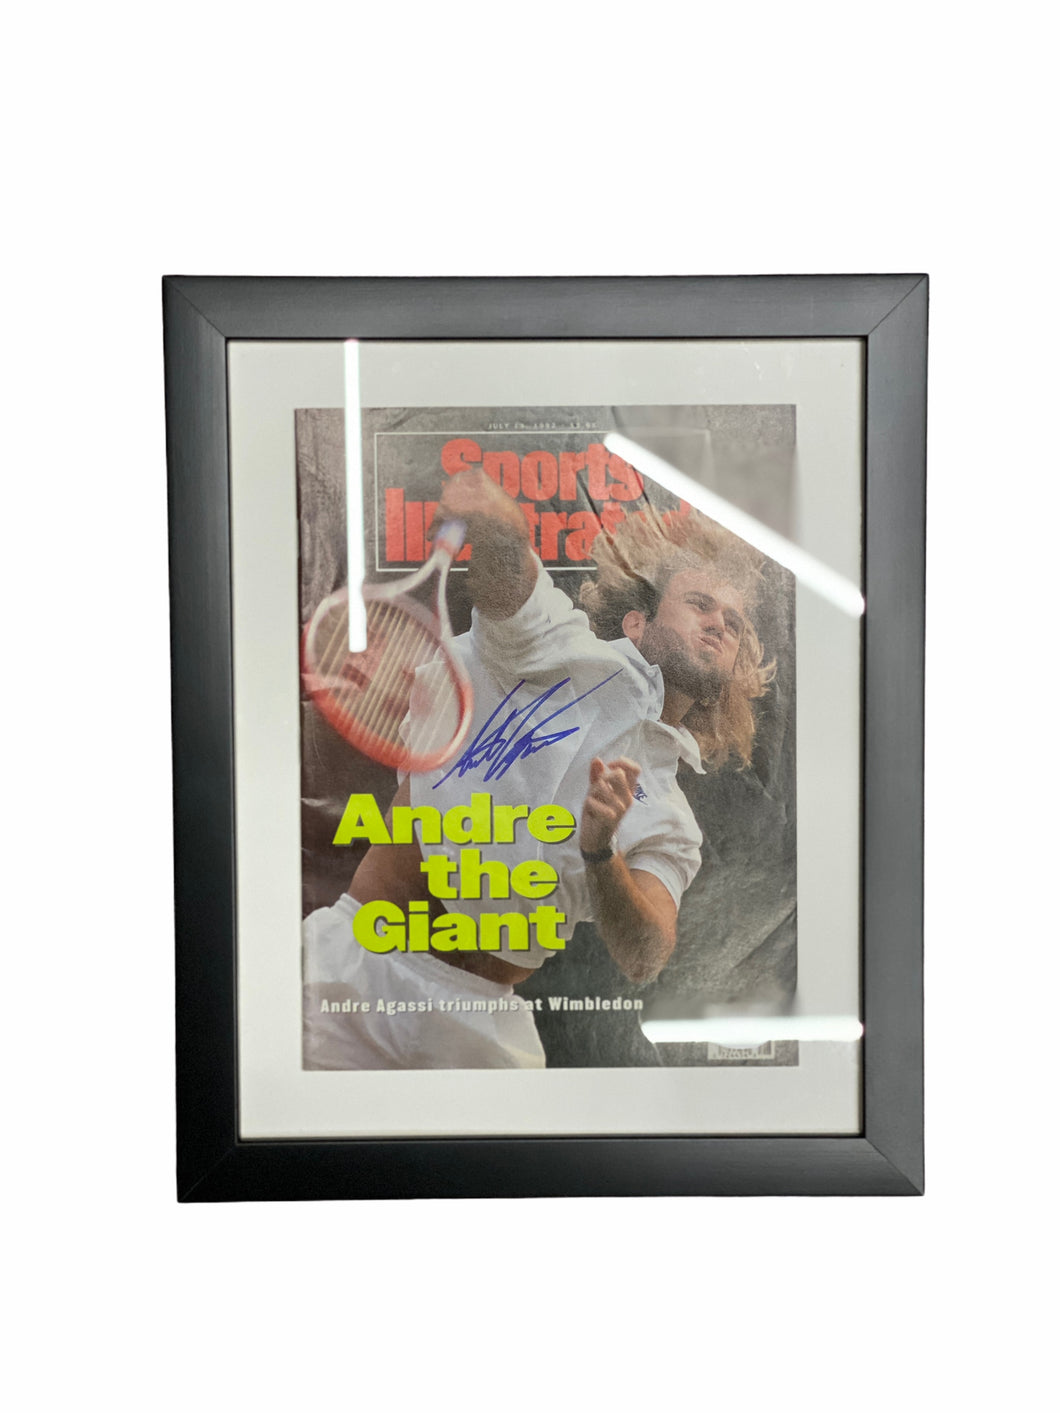 Sports Illustrated / Tenis / Andre Agassi